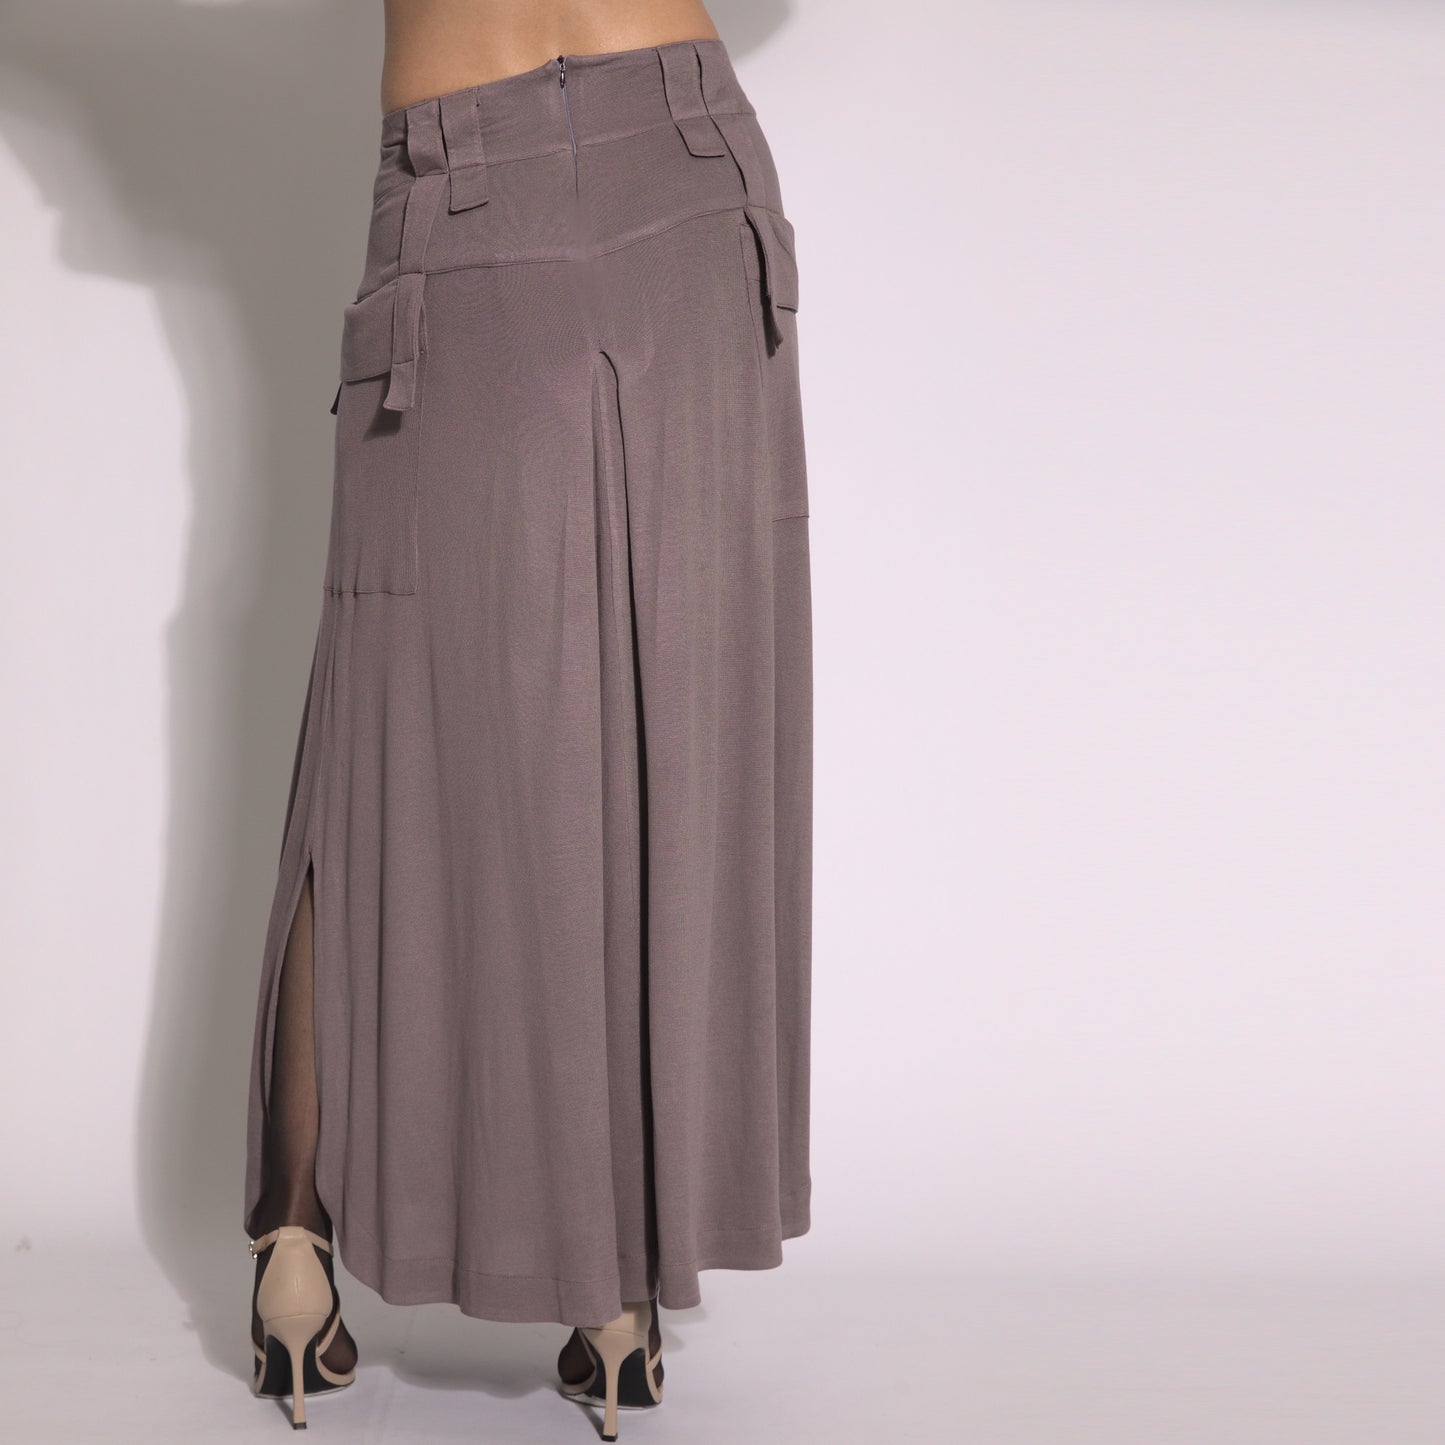 Luna - maxi skirt with side slits and cargo pockets